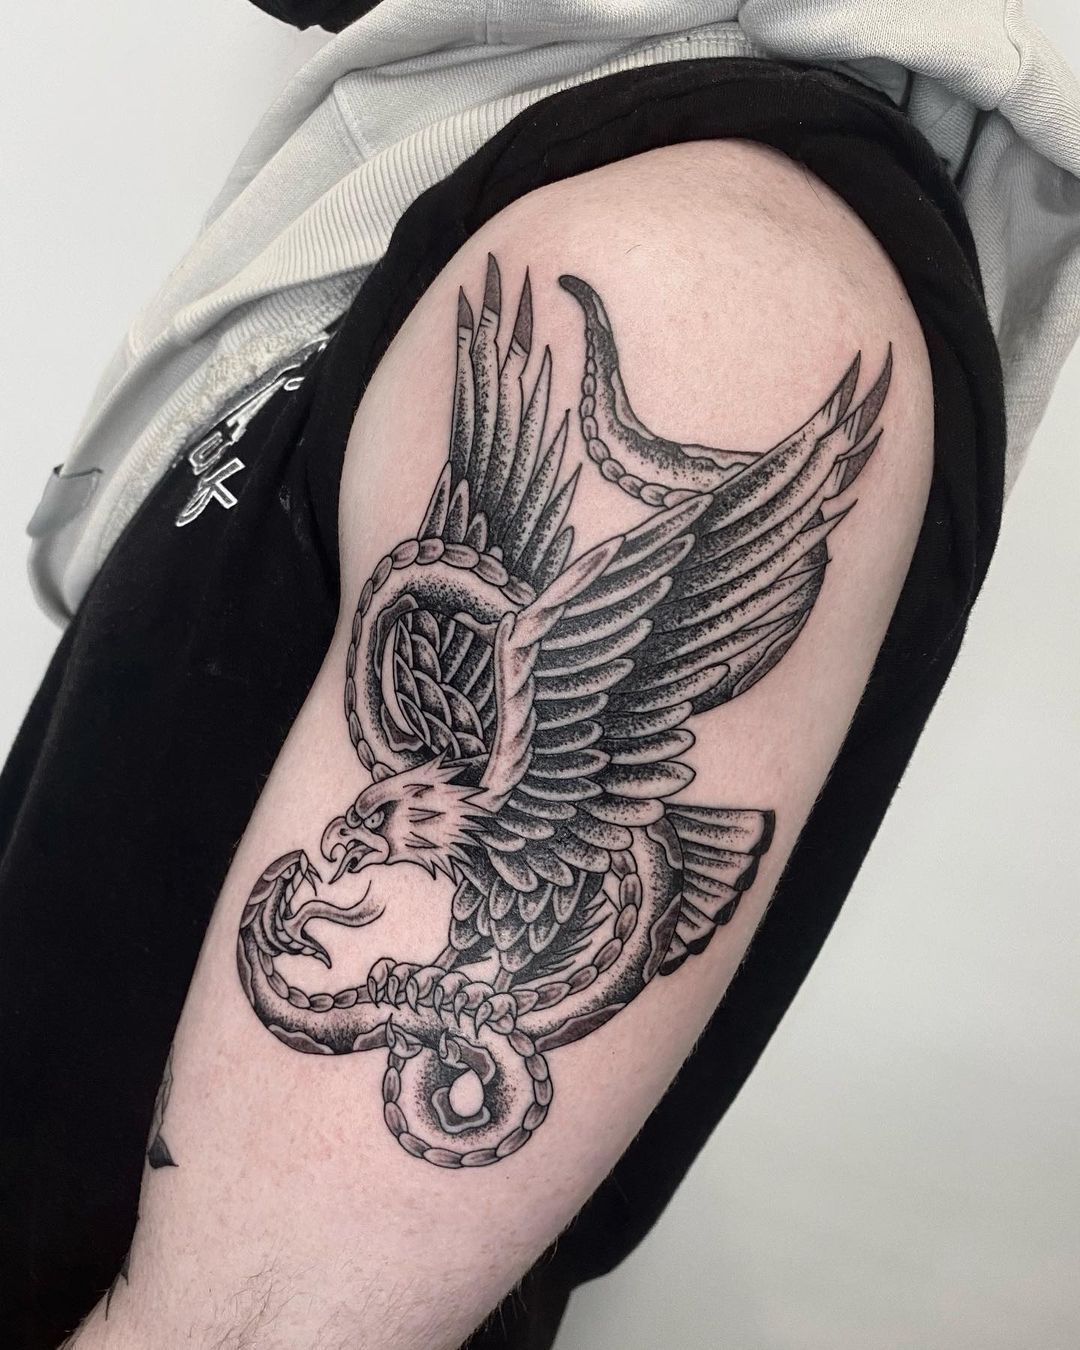 fashionoid Eagle Snake With Sword Waterproof Temporary Tattoo For Boys  Girls Men Women  Price in India Buy fashionoid Eagle Snake With Sword  Waterproof Temporary Tattoo For Boys Girls Men Women Online